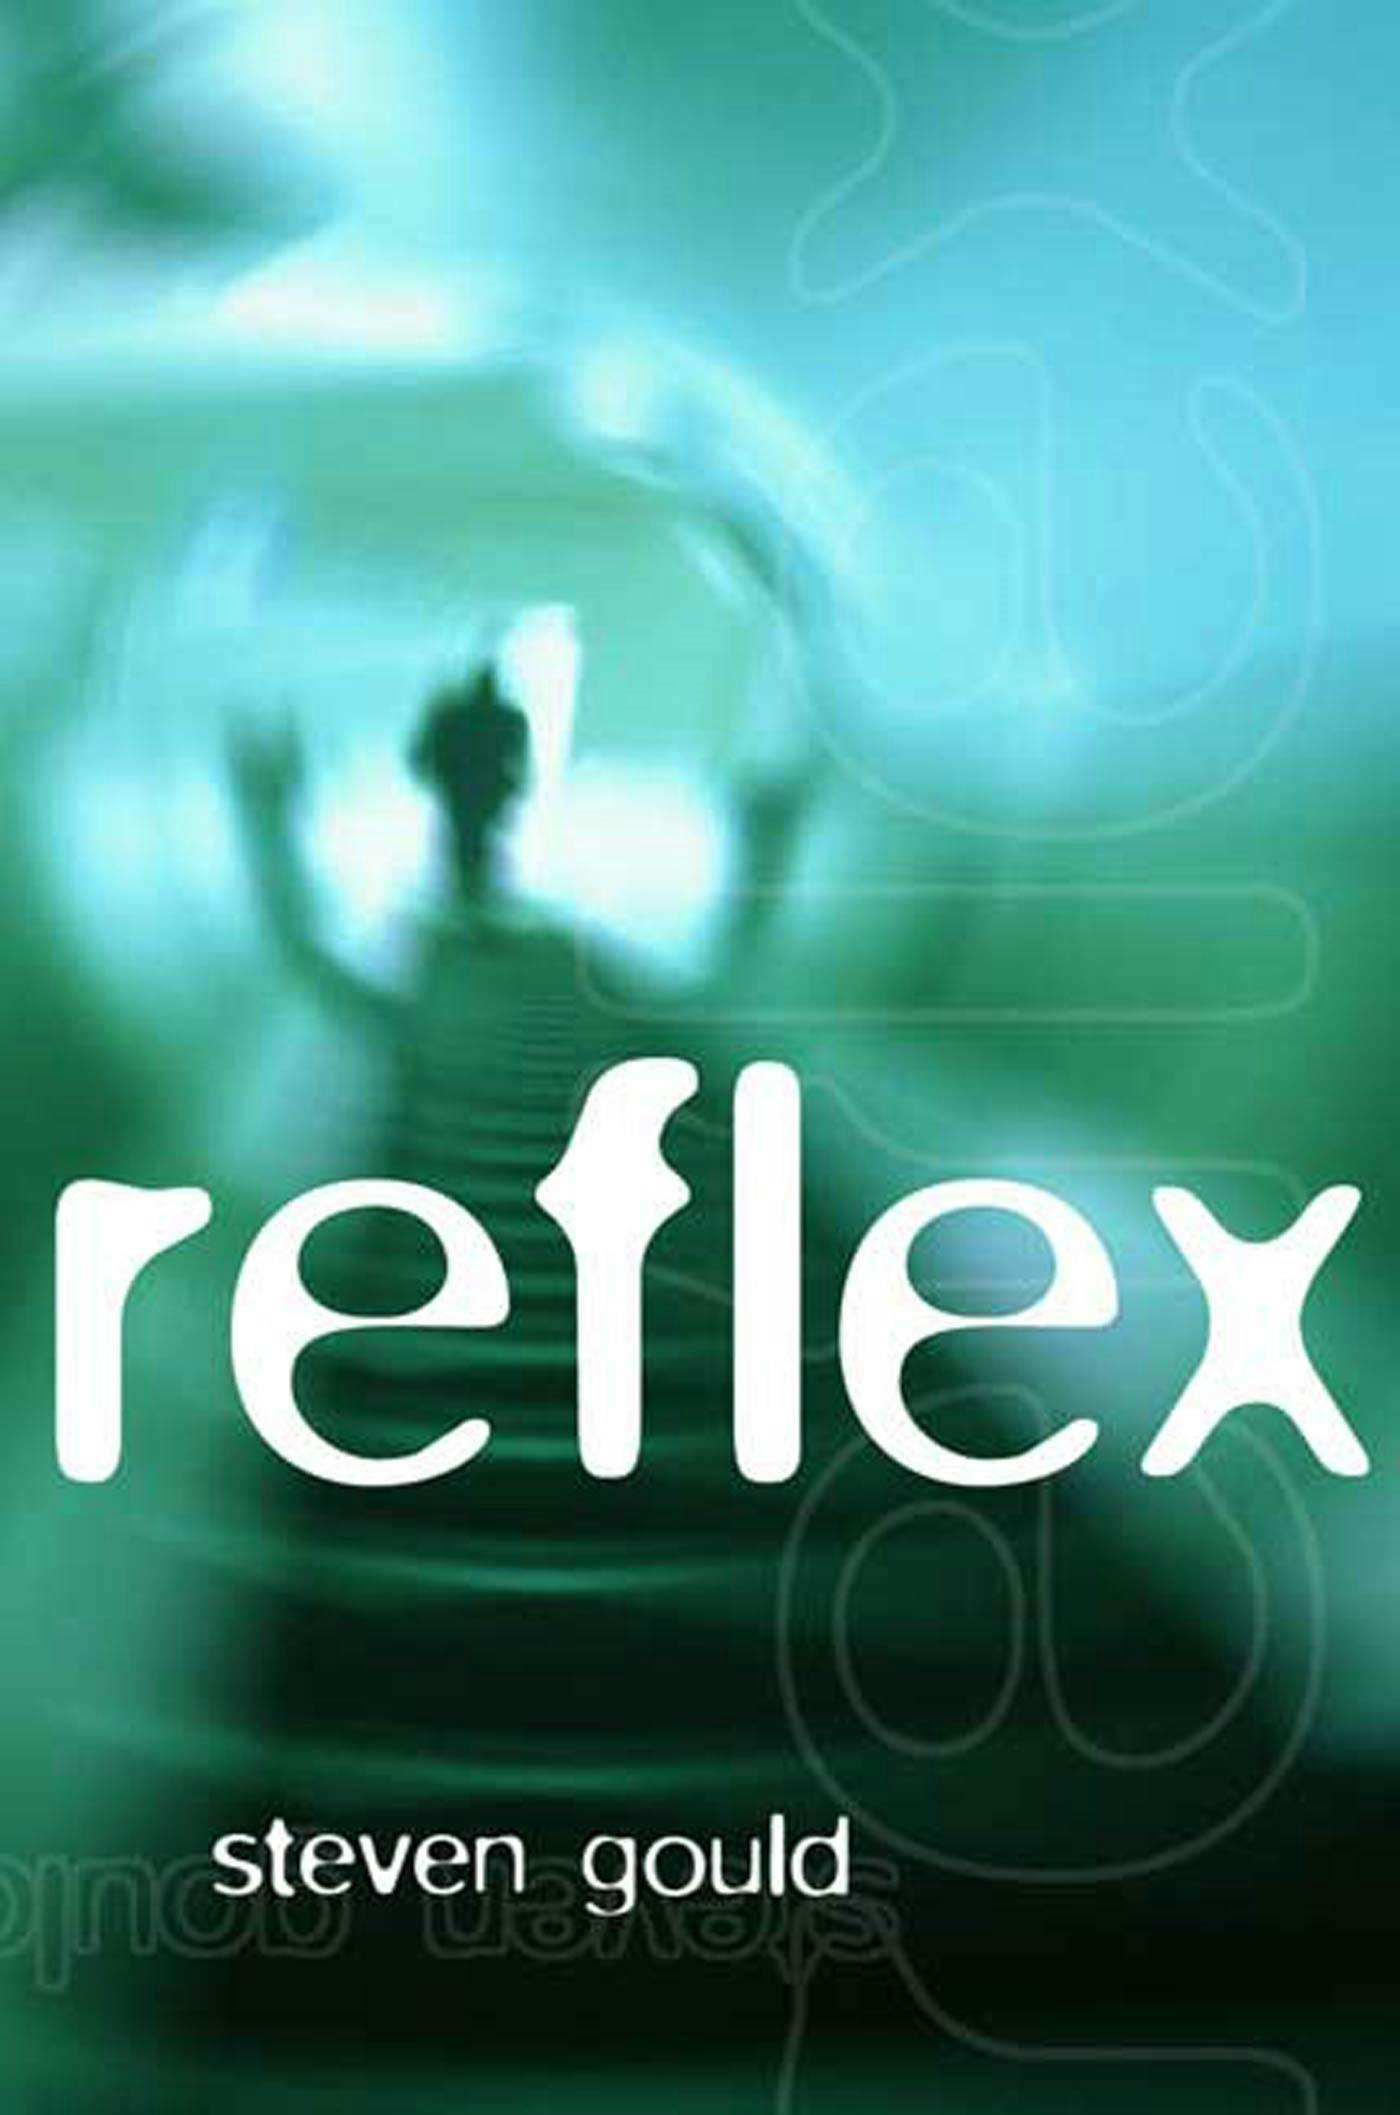 Cover for the book titled as: Reflex